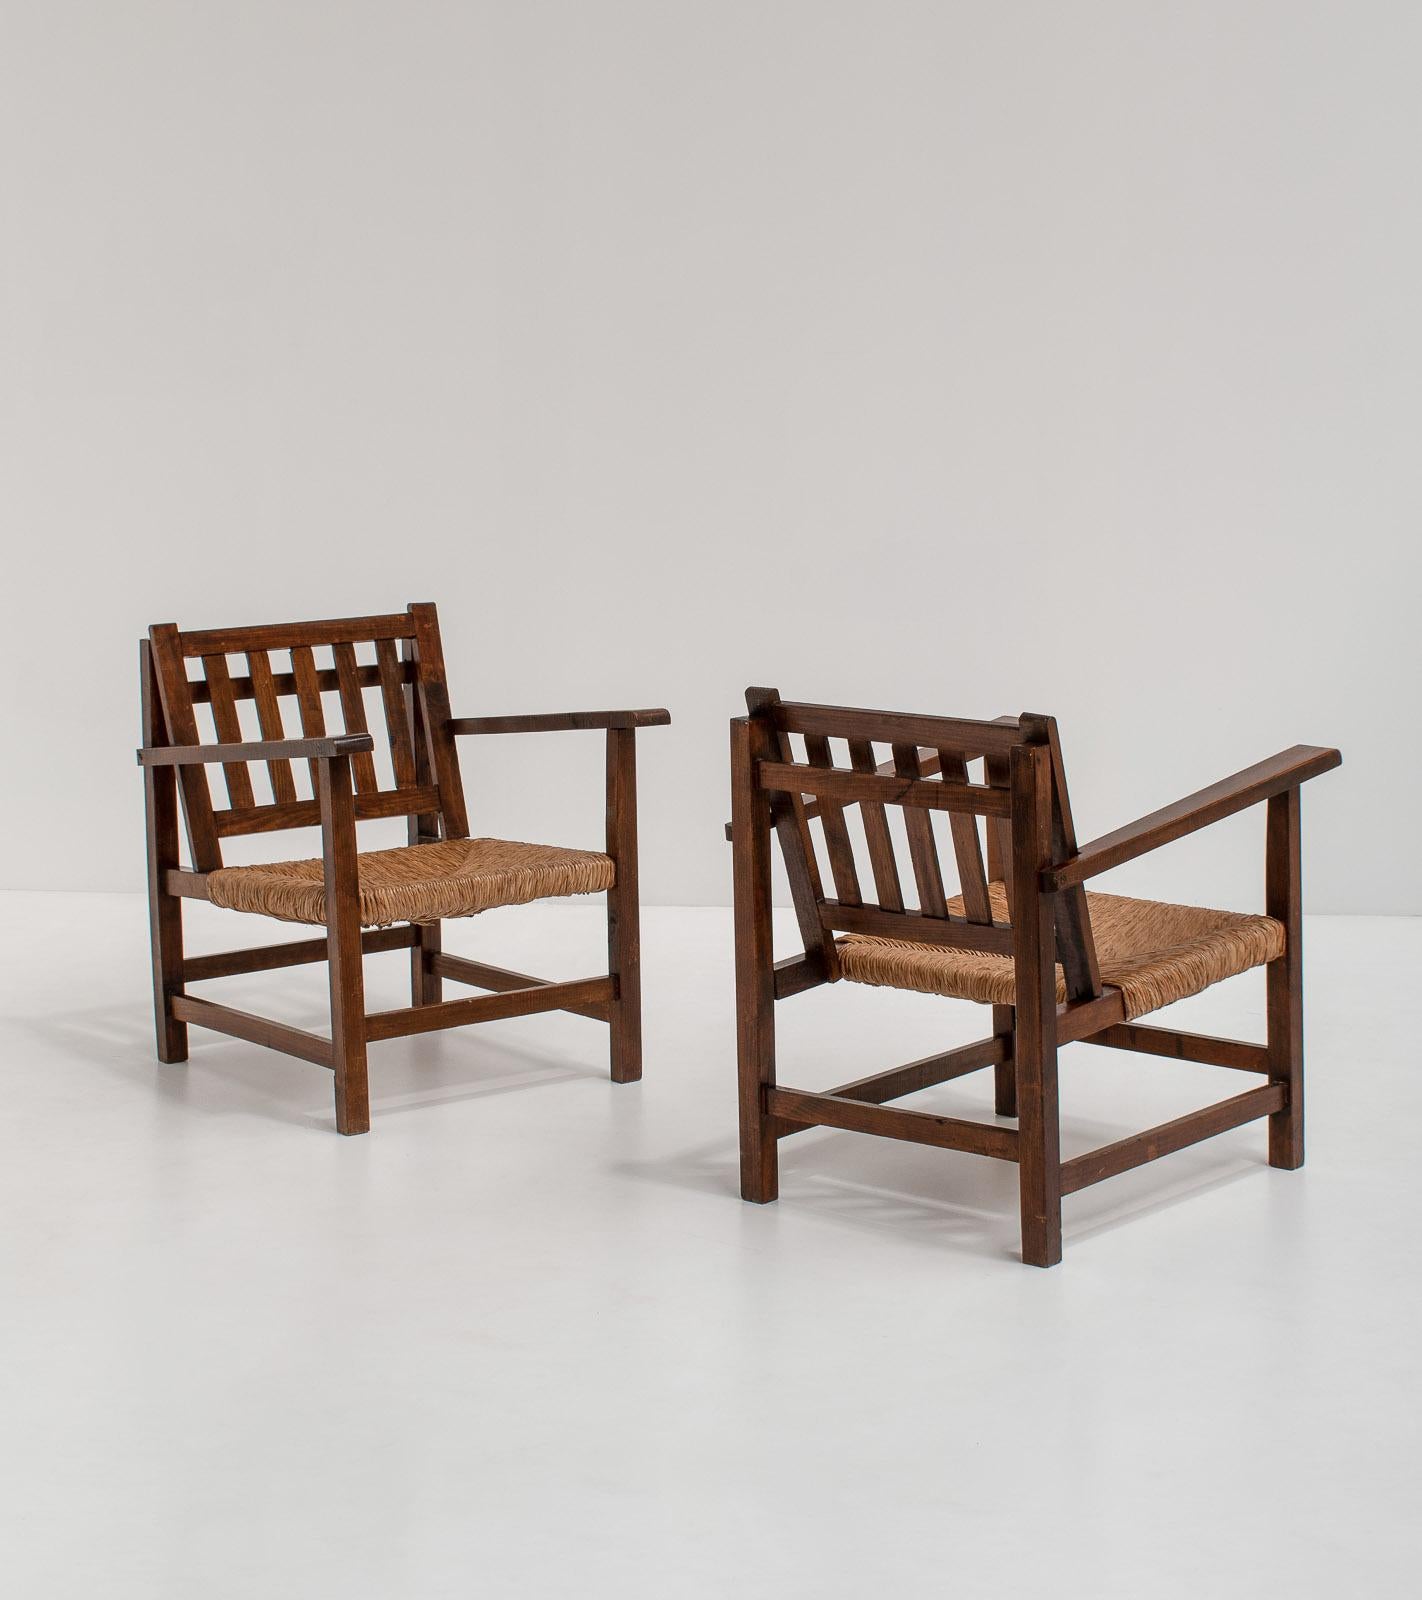 Pair of unique rationalist armchairs, Spain, 1960s by unknown manufacturer.

The beauty of these chairs comes from the straightforwardness of the design. The frame is highly sculptural and architectural, consisting of only straight lines, which is